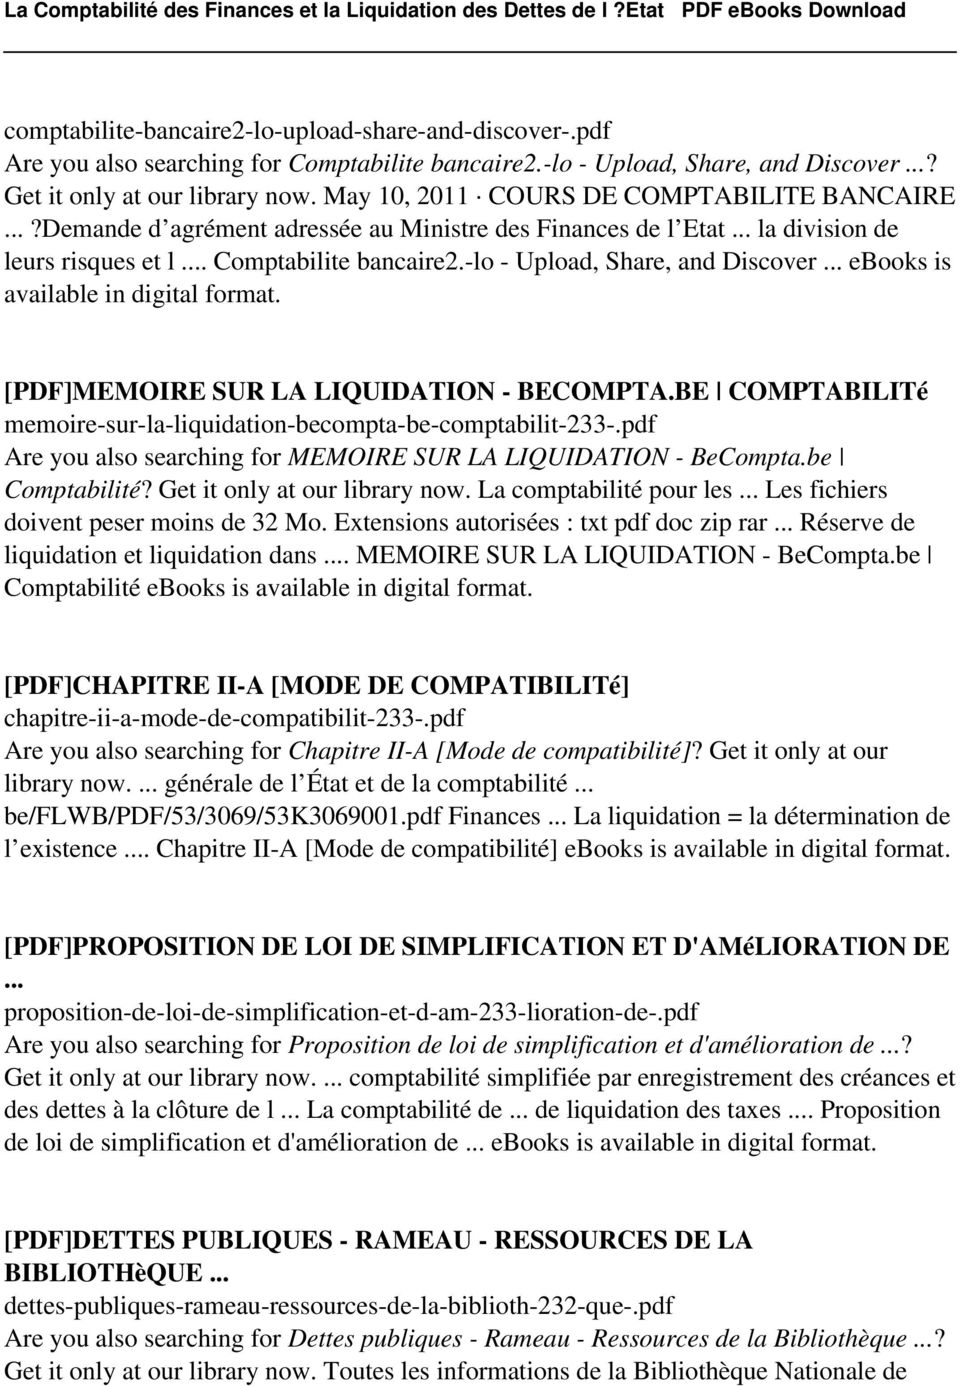 -lo - Upload, Share, and Discover... ebooks is available in digital [PDF]MEMOIRE SUR LA LIQUIDATION - BECOMPTA.BE COMPTABILITé memoire-sur-la-liquidation-becompta-be-comptabilit-233-.